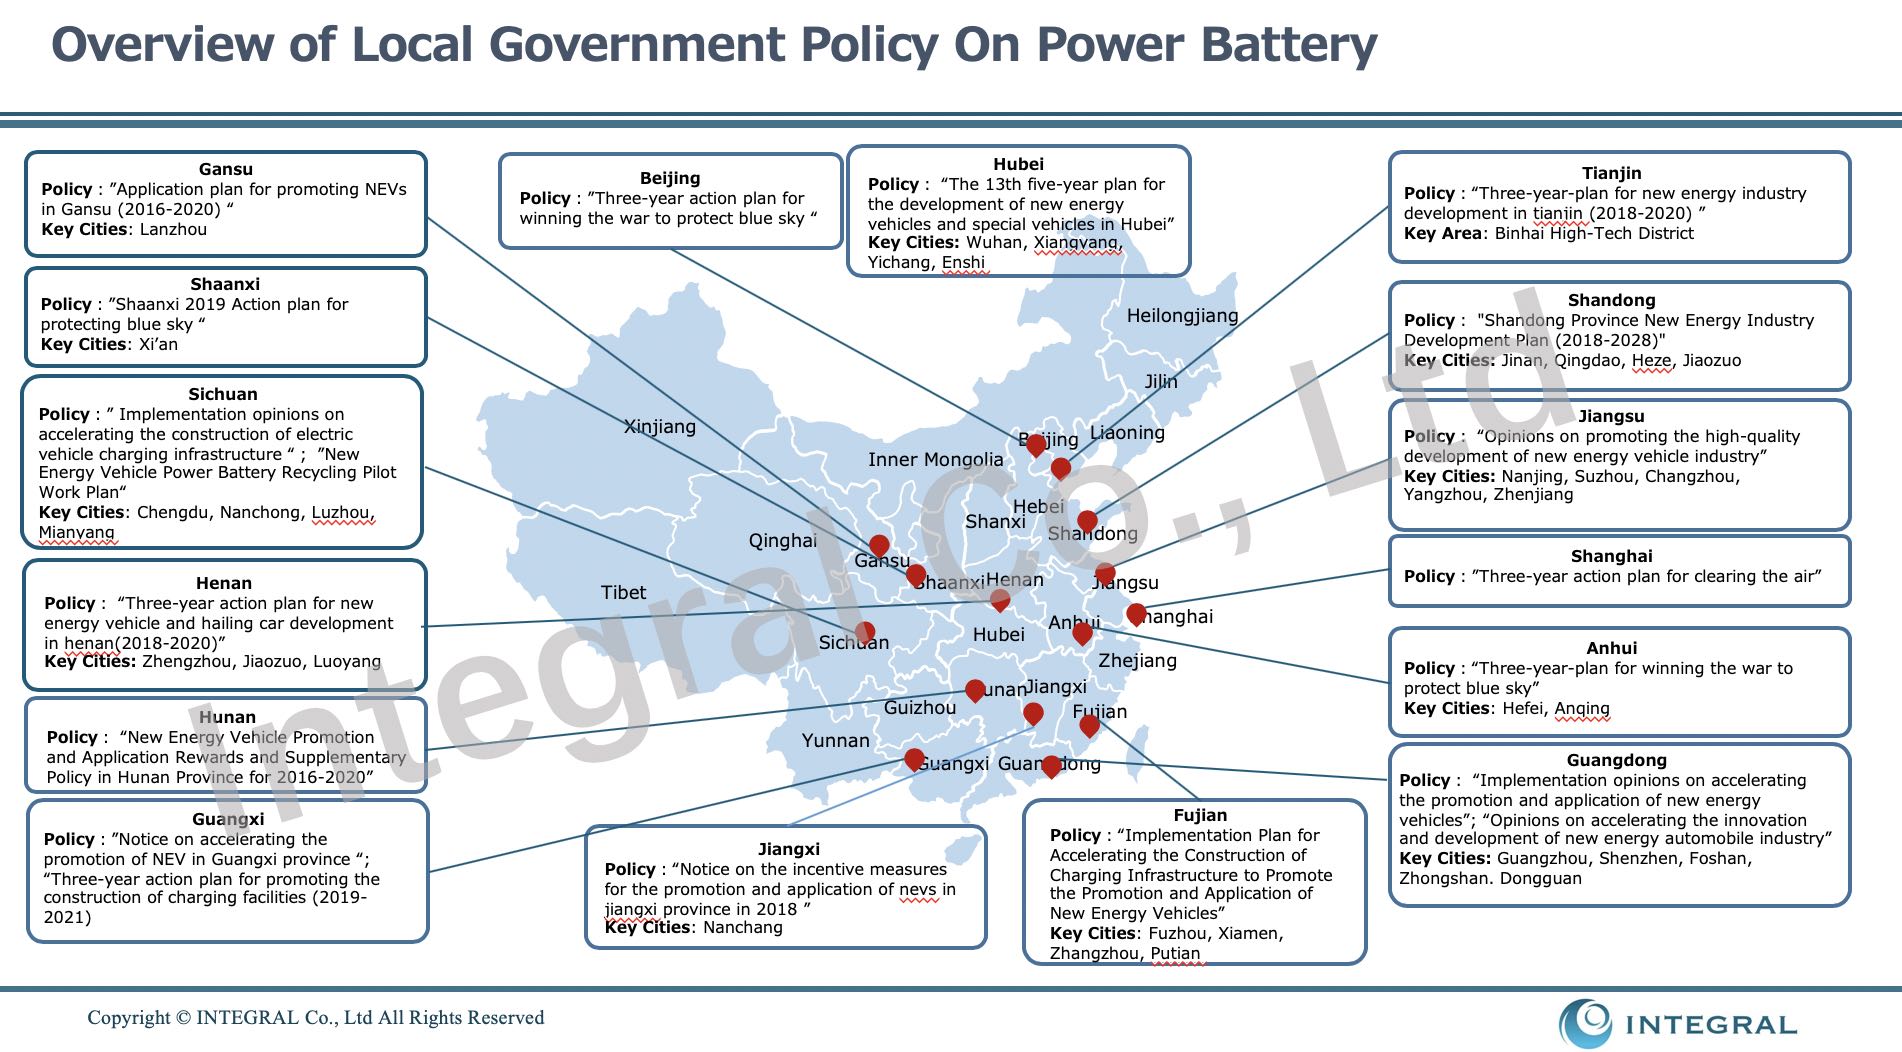 Key Insights on China’s Policies on Developing New Energy Vehicles